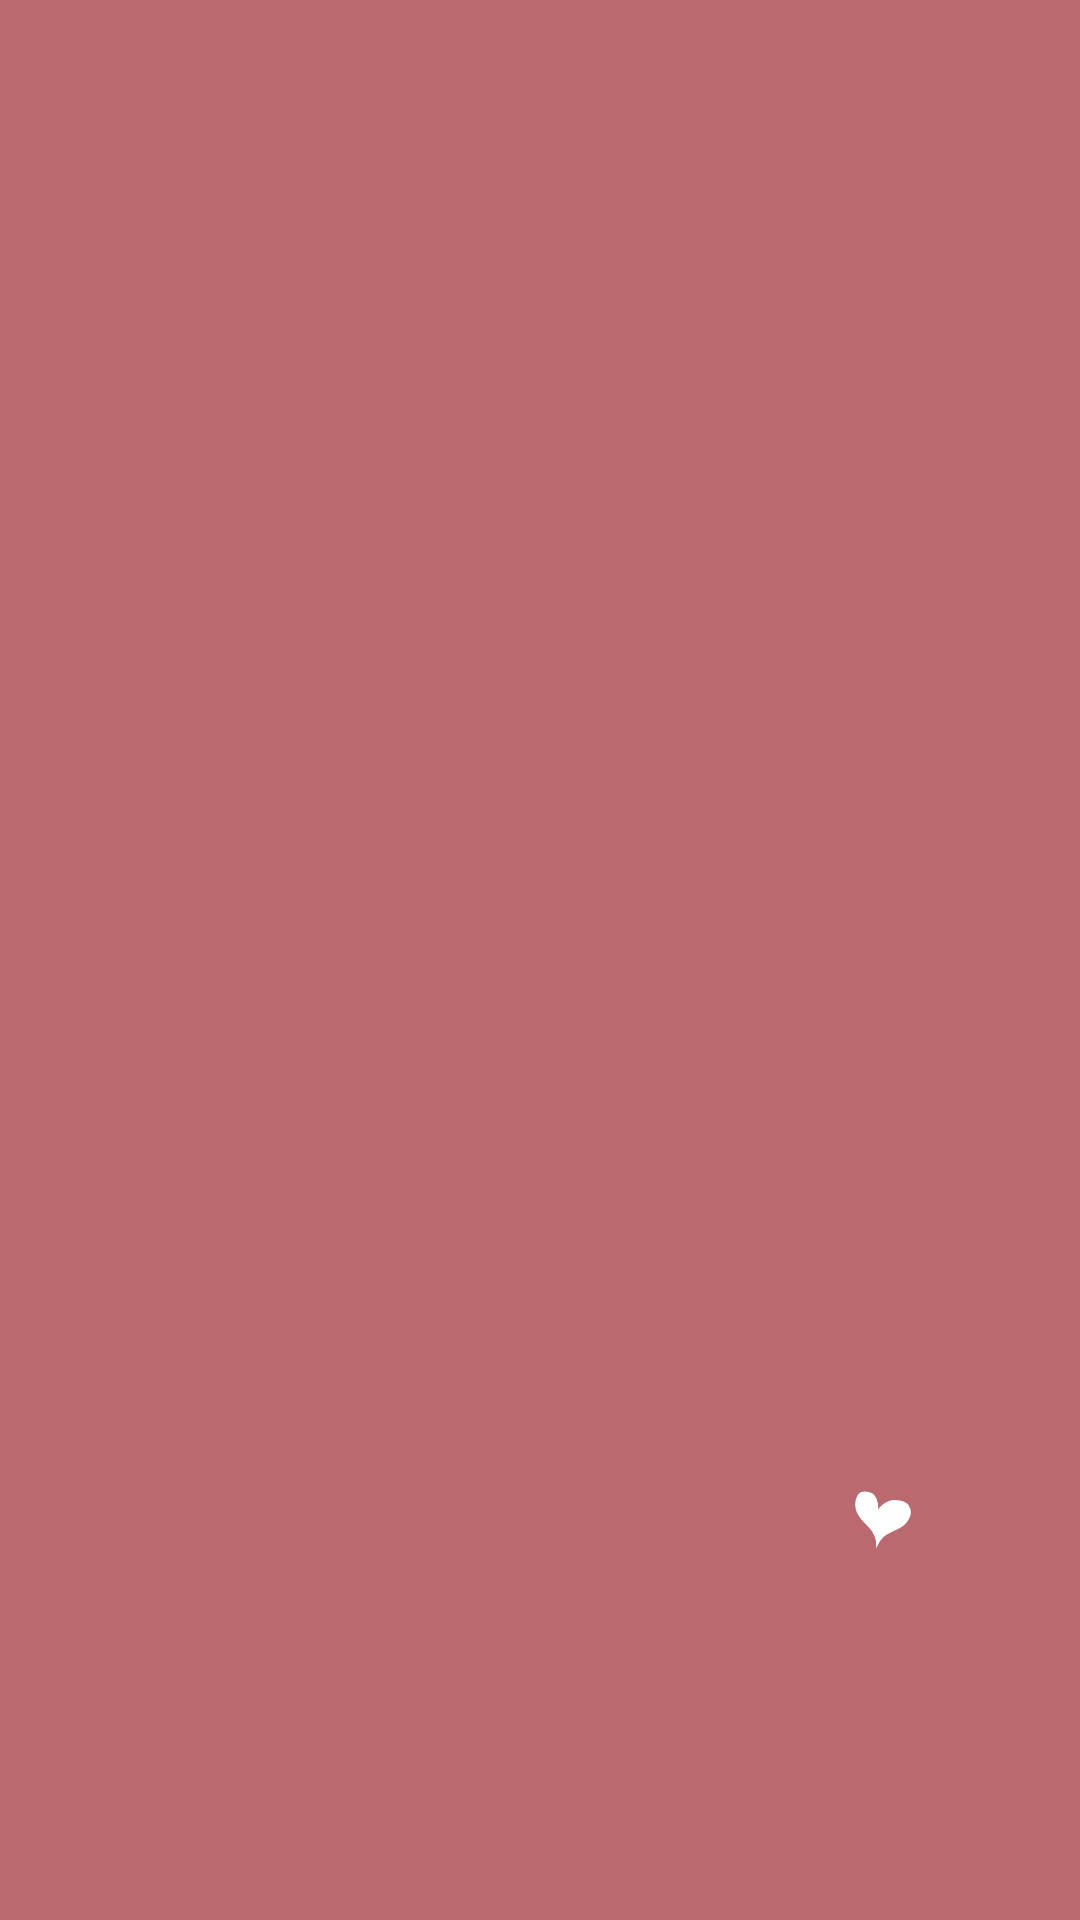 Plain Dull Pink Iphone Background